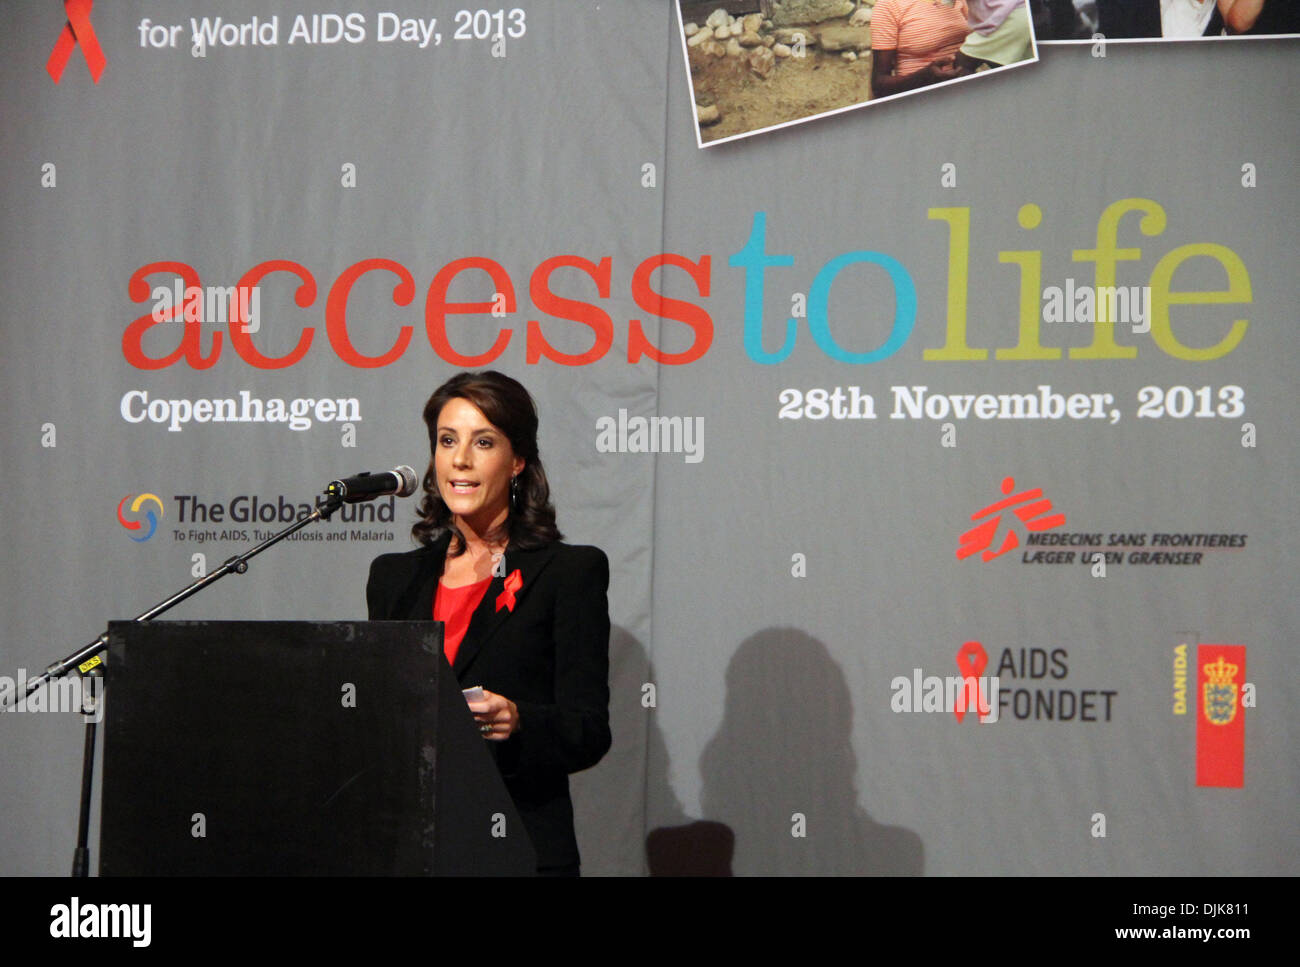 (131128) -- COPENHAGEN, Nov. 28, 2013 (Xinhua) -- Denmark's Crown Princess Mary speaks during the opening ceremony of the photo exhibition 'Access to Life' to mark the World AIDS Day in Copenhagen, Denmark, Aug. 28, 2013. The photo exhibition, held by The Global Fund to Fight AIDS, Tuberculosis and Malaria, will last to Jan. 12, 2014. (Xinhua/Yang Jingzhong) Stock Photo